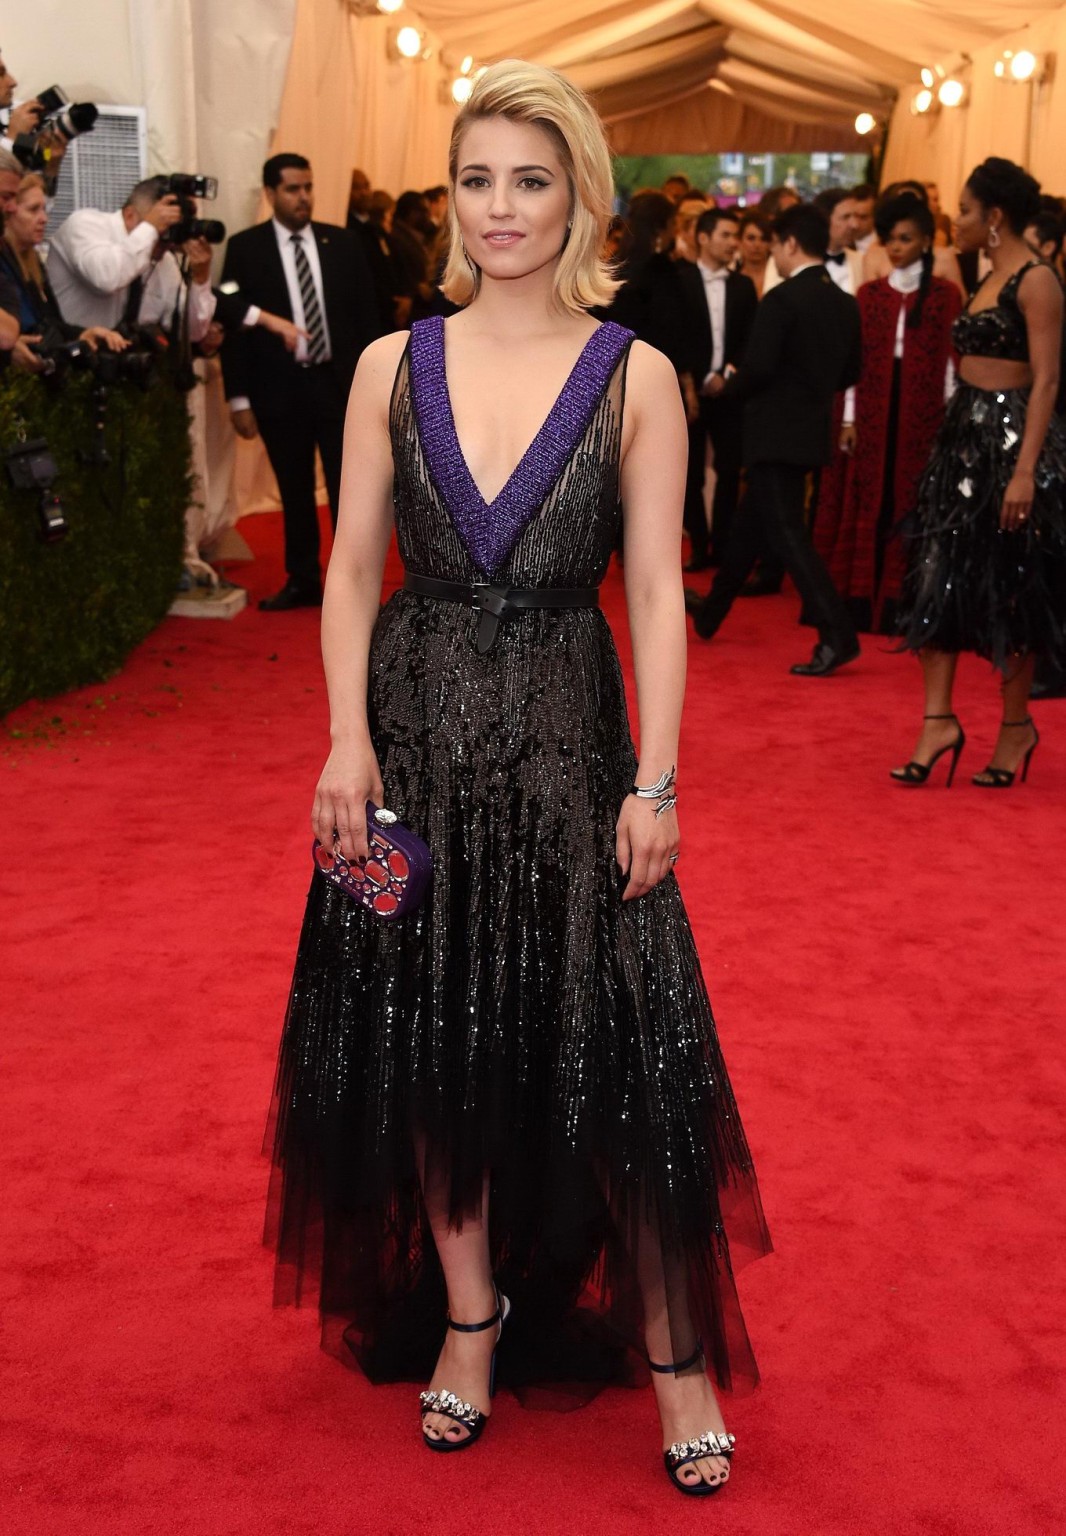 Dianna Aragon showing cleavage at the 2014 Met Gala in NYC #75196908